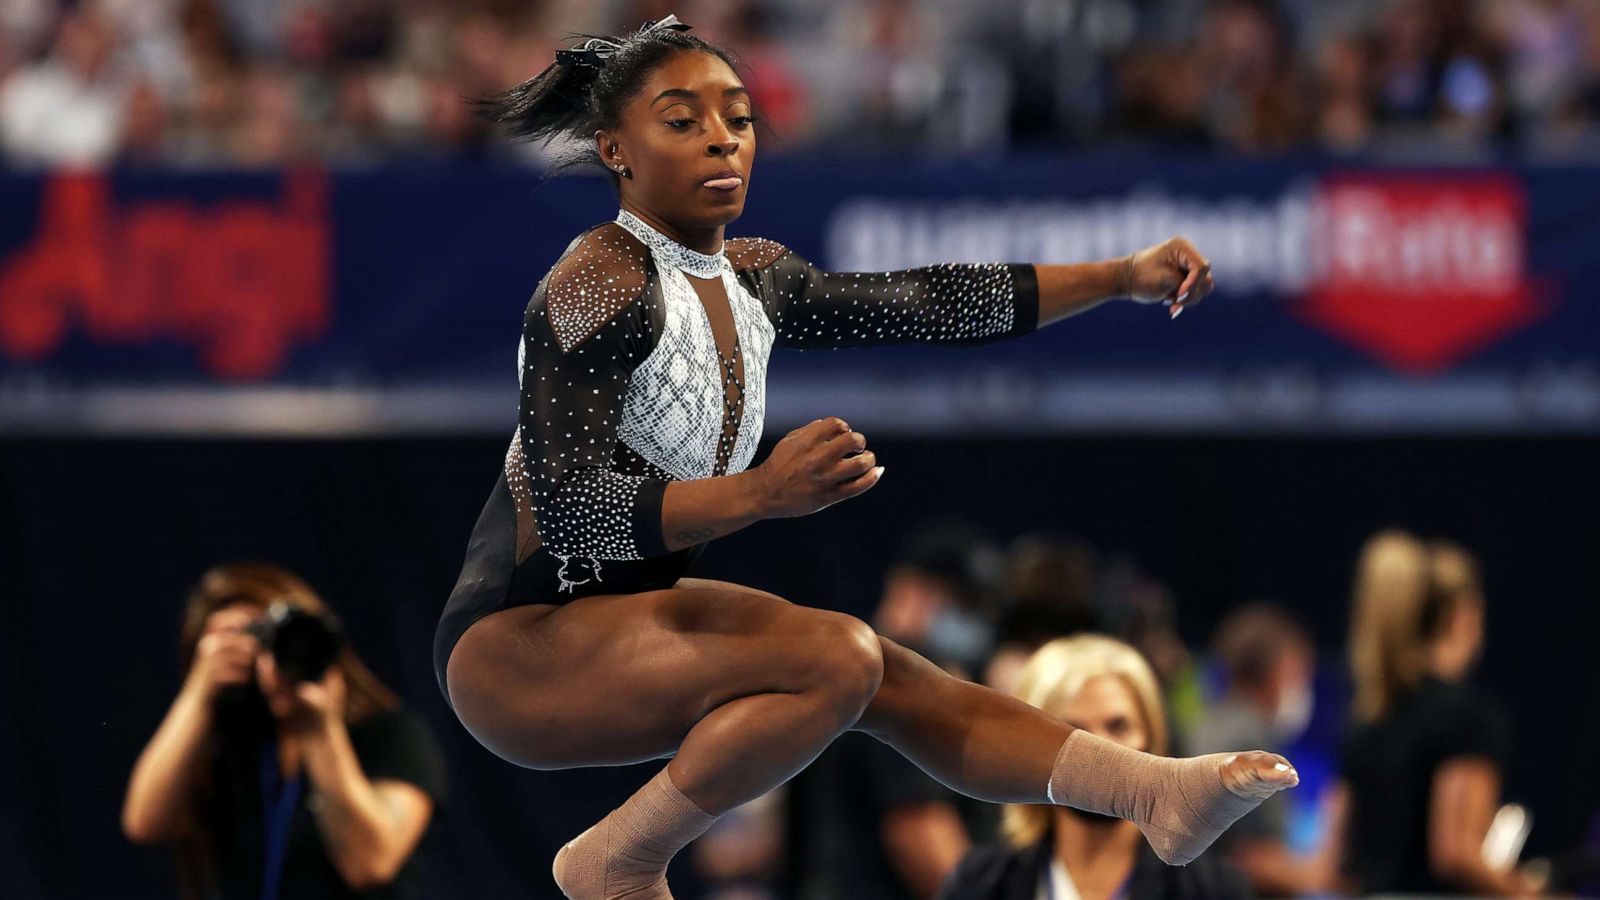 US Olympic women's gymnastics trials feature more diverse athletes, but barriers persist